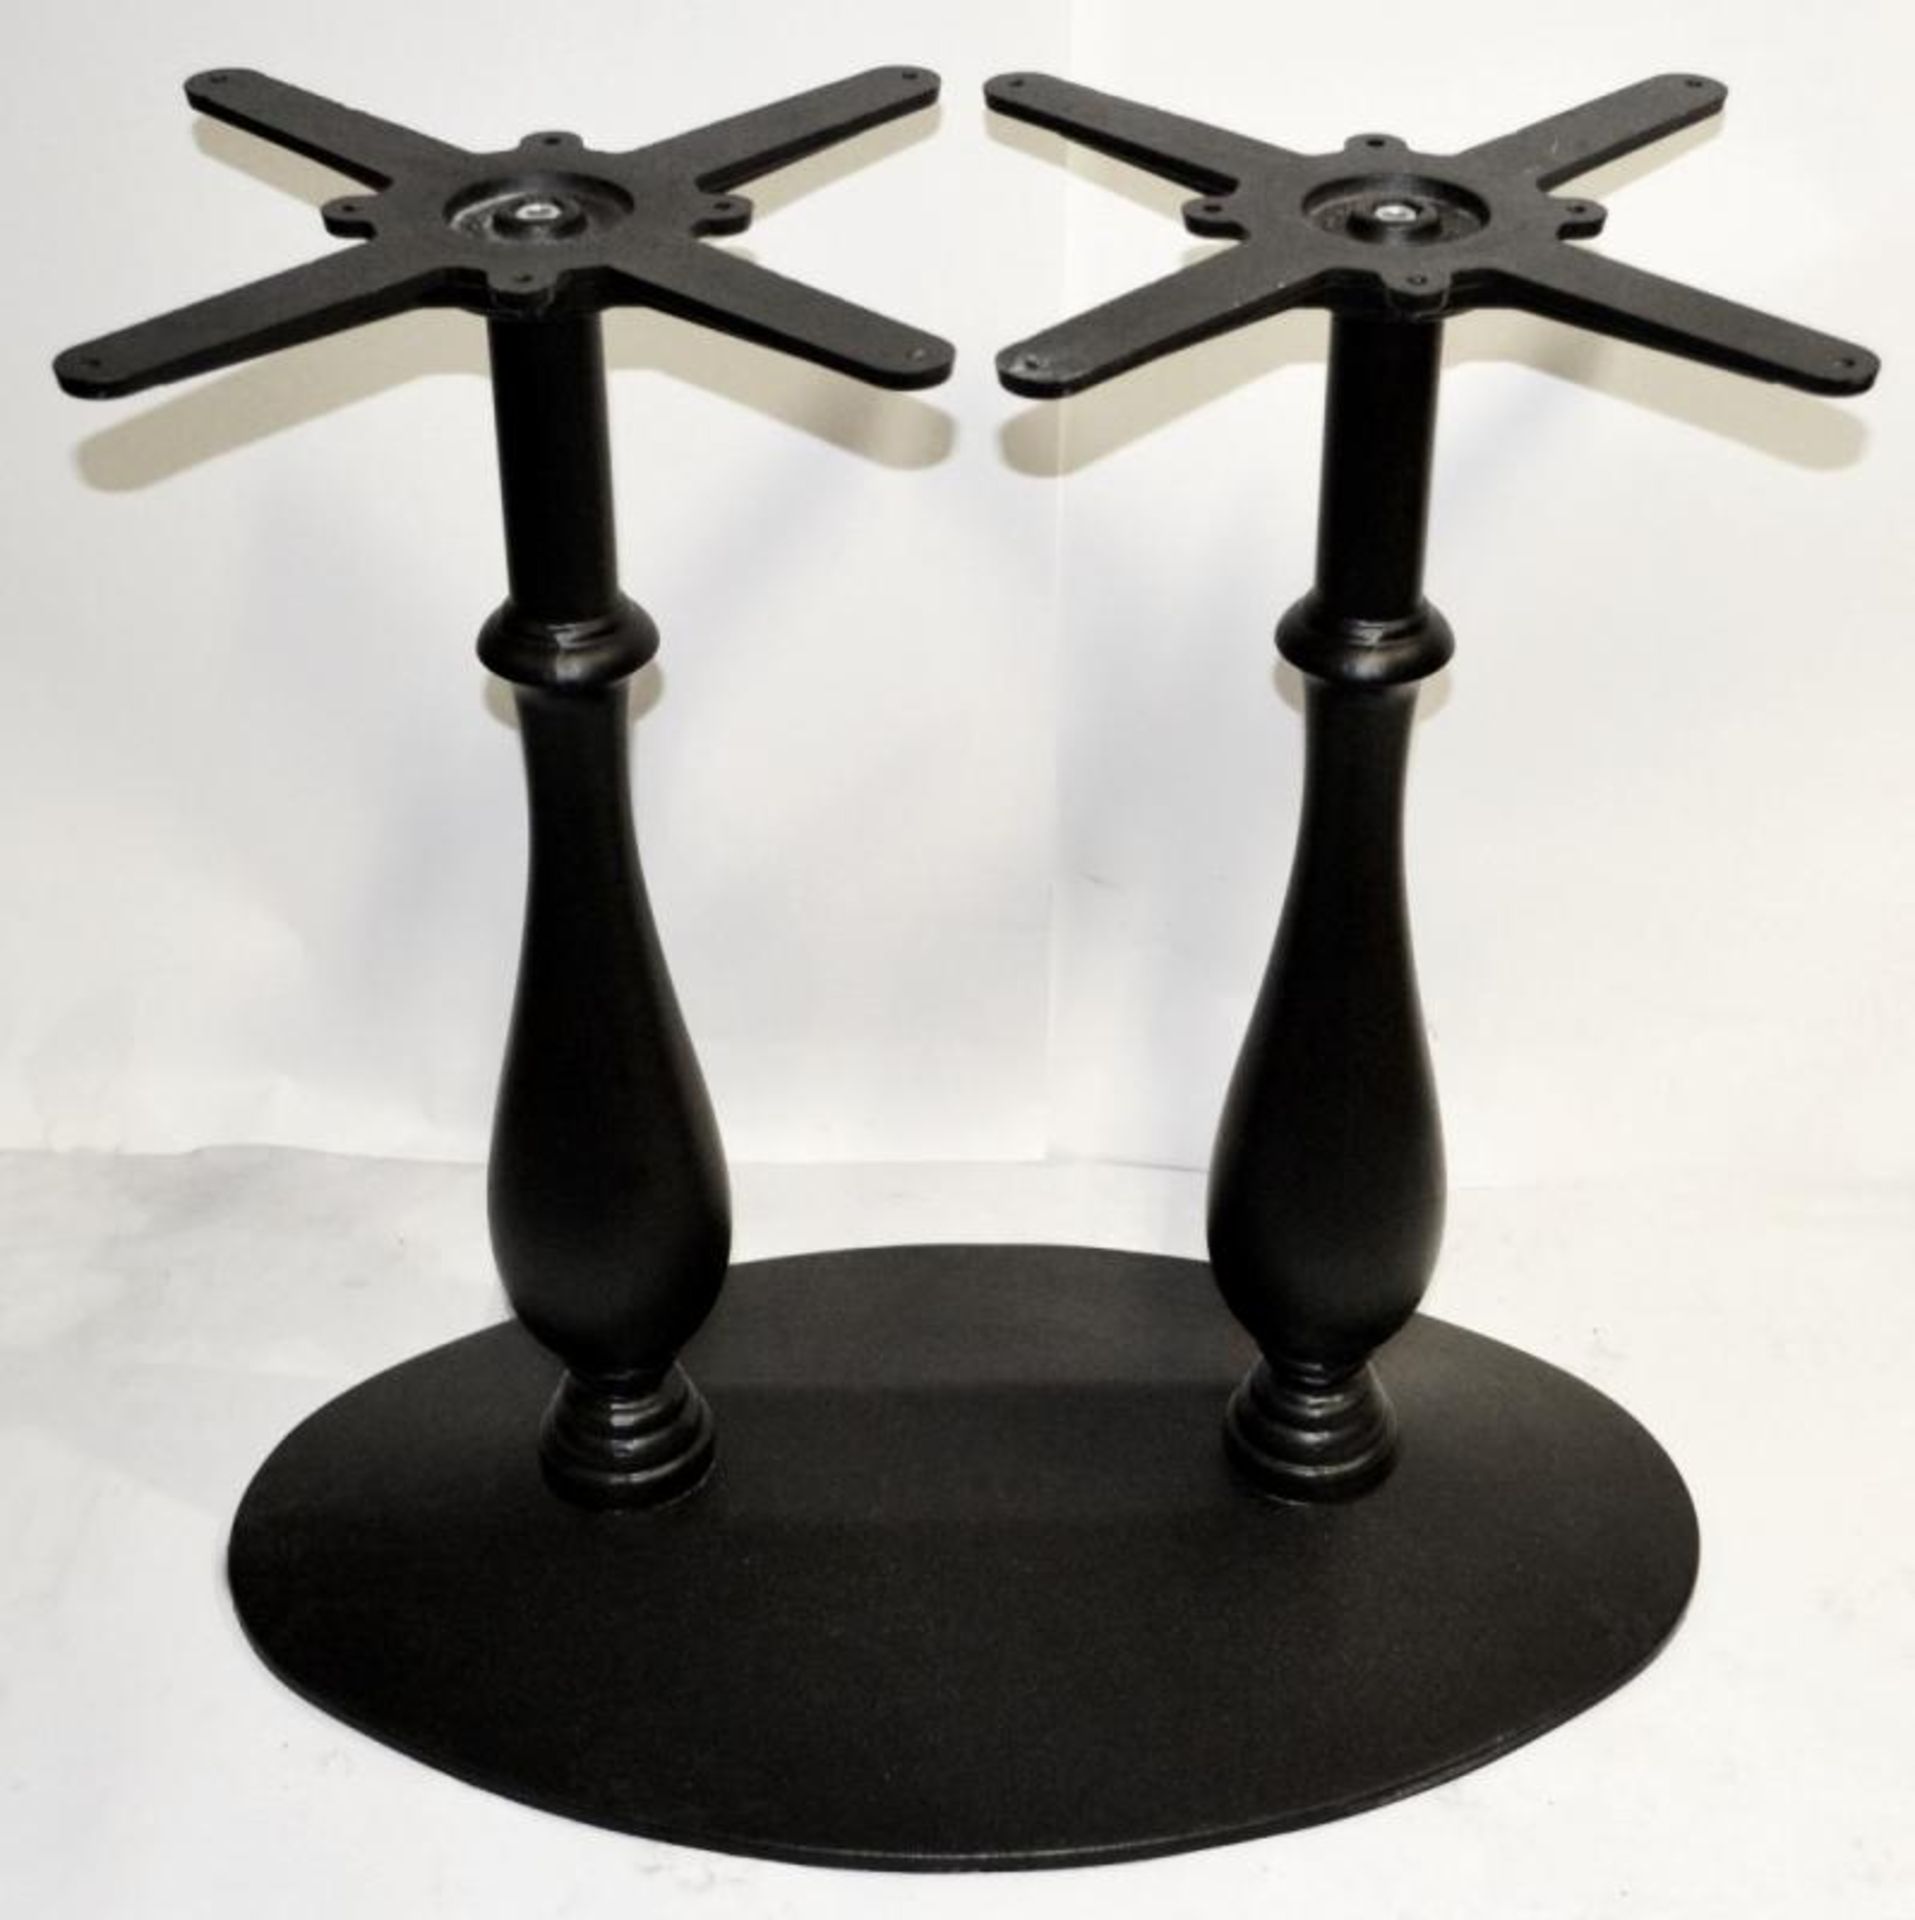 1 x Twin Pedestal Table Base in Cast Iron - Suitable For Pubs or Restaurants - Removed From City